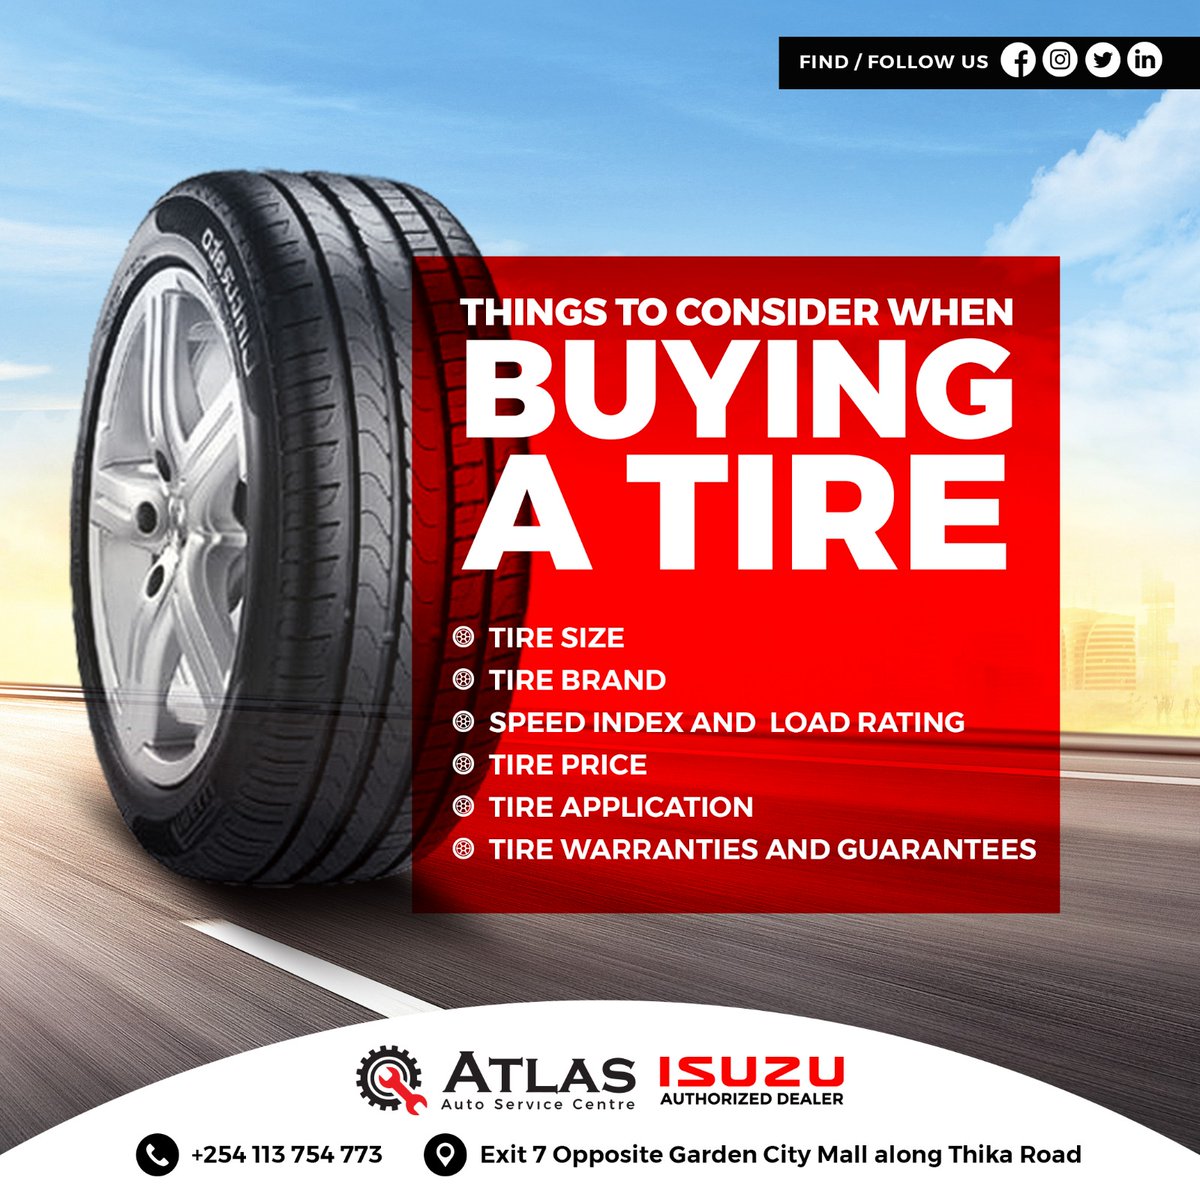 Coolnsiderations for Tire Shopping! 🚗✨ Tread carefully as you explore the key factors in choosing the perfect tire. From size to performance, we've got your guide to making the best decision for your ride. 🔄🔍#howcanwehelp #TireShoppingGuide #ChooseWisely #RoadReady